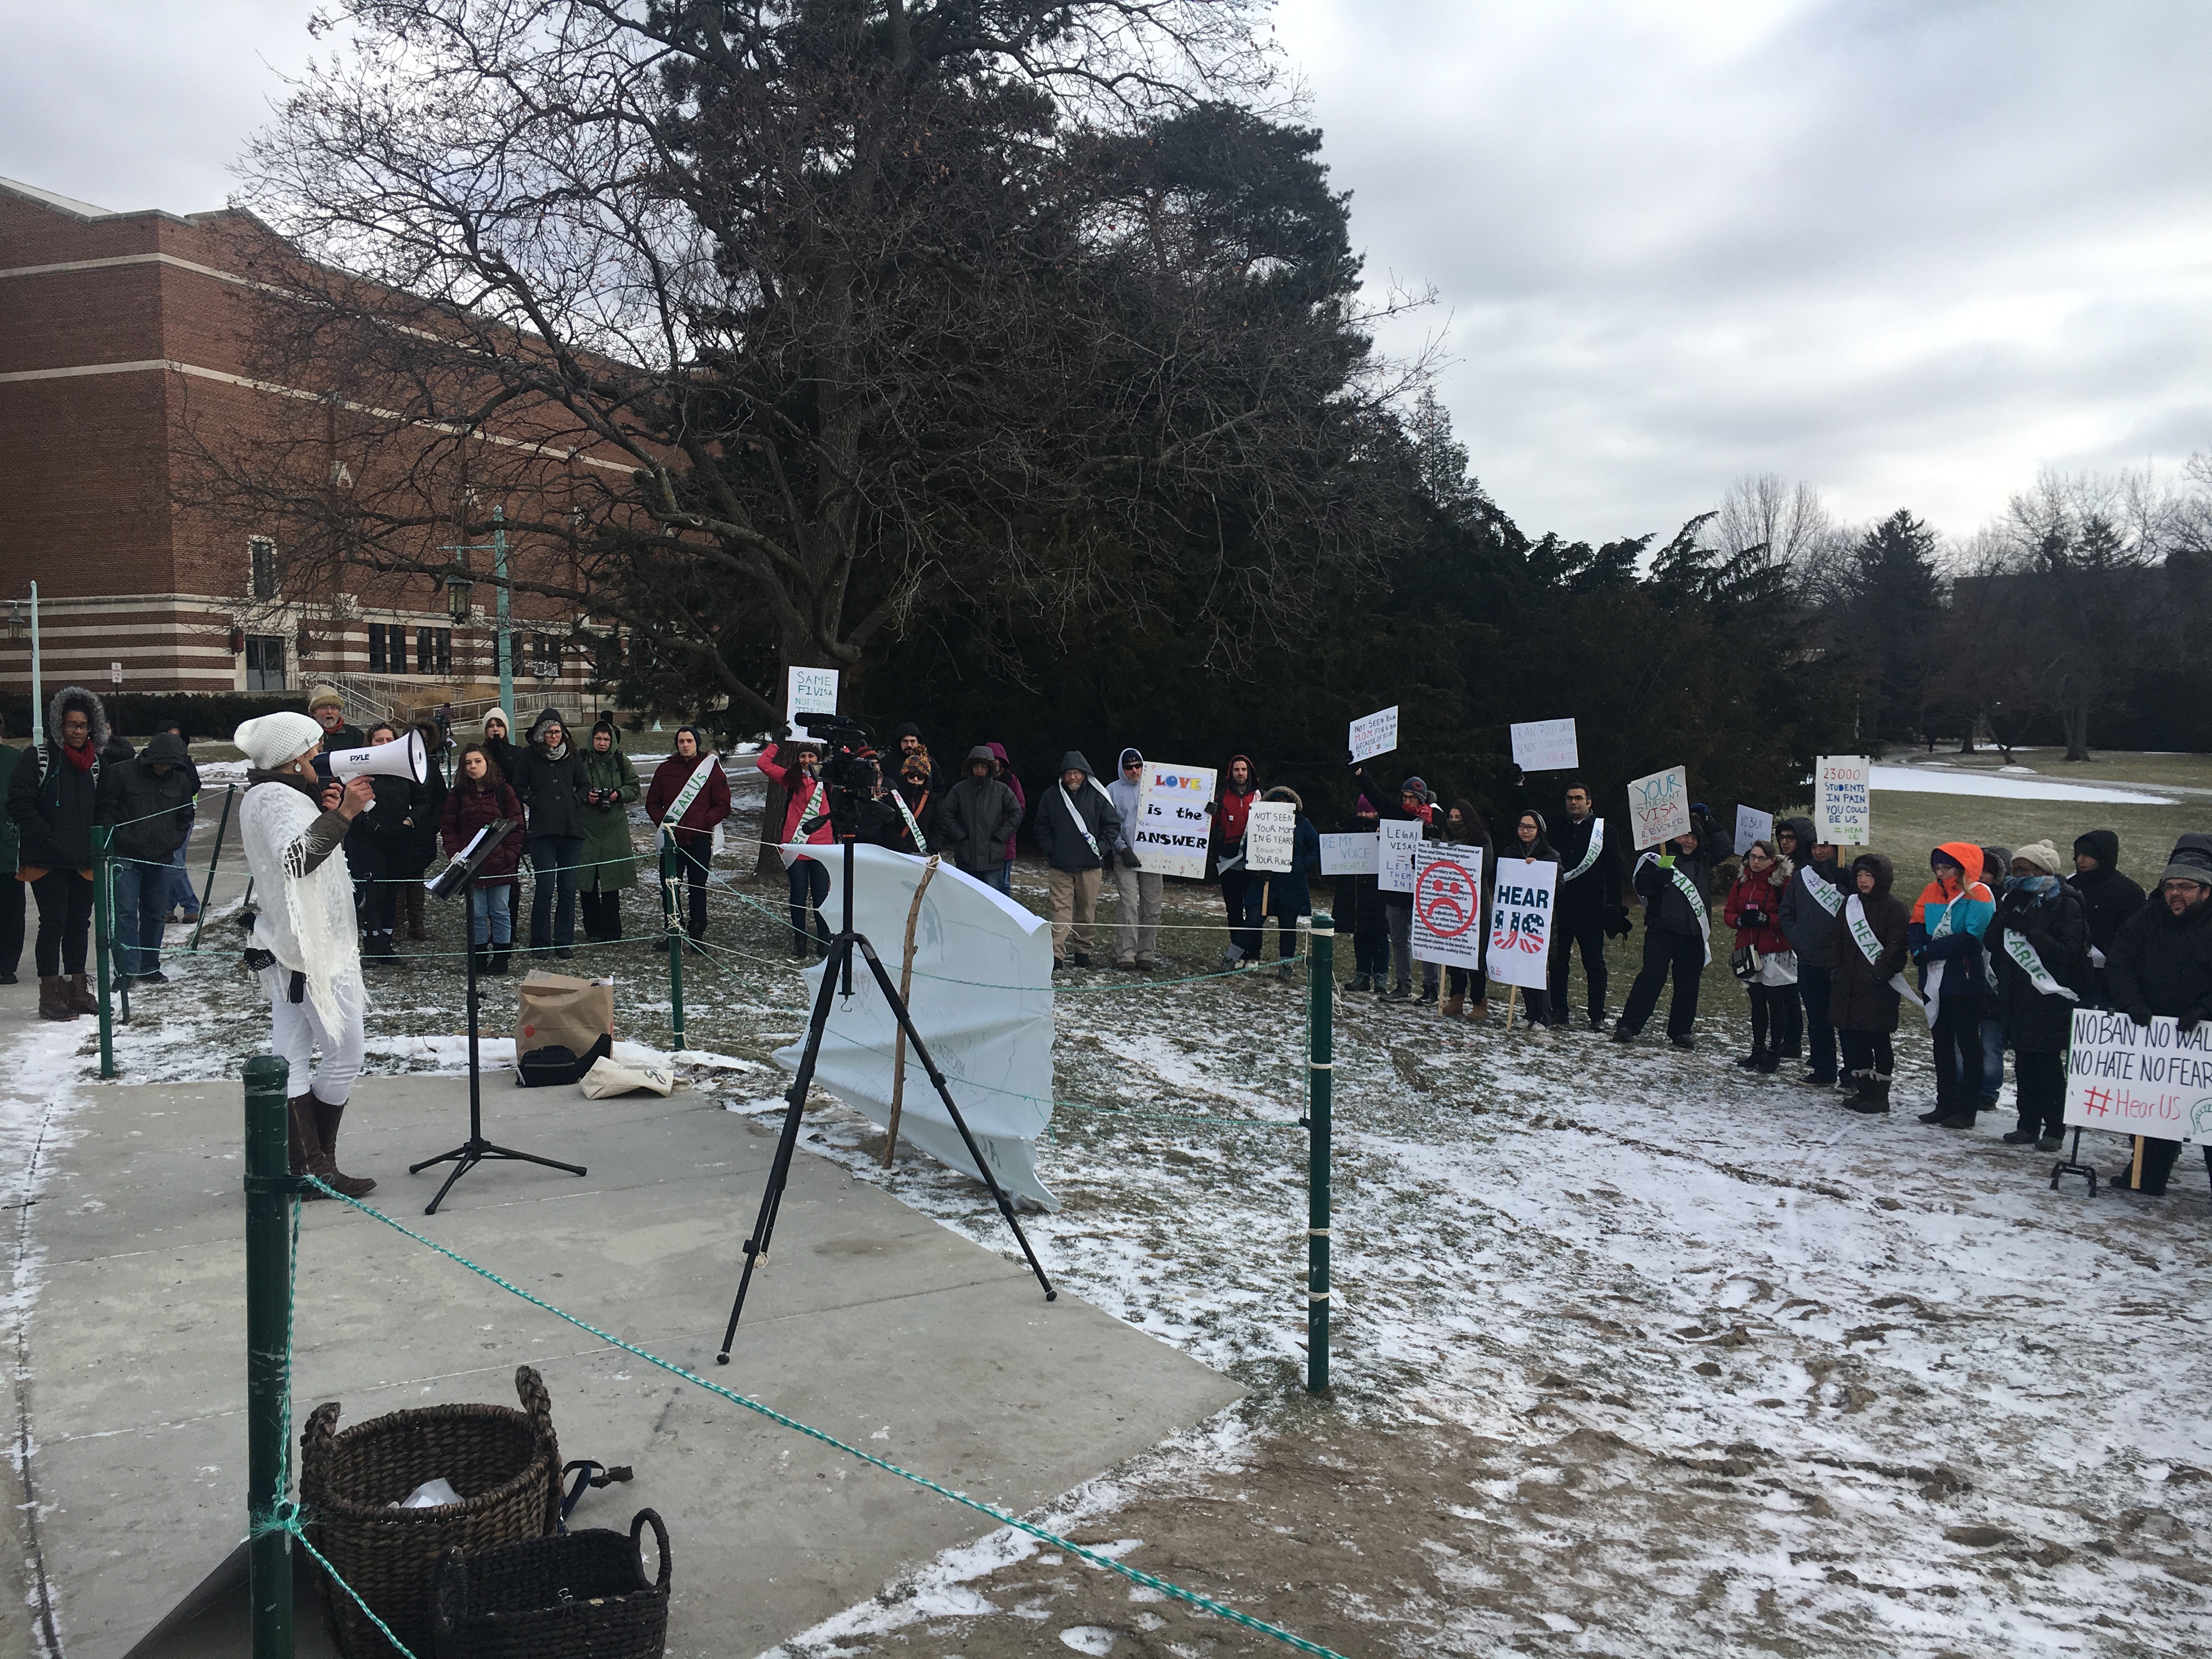 Students Gather in Solidarity for Immigration Ban